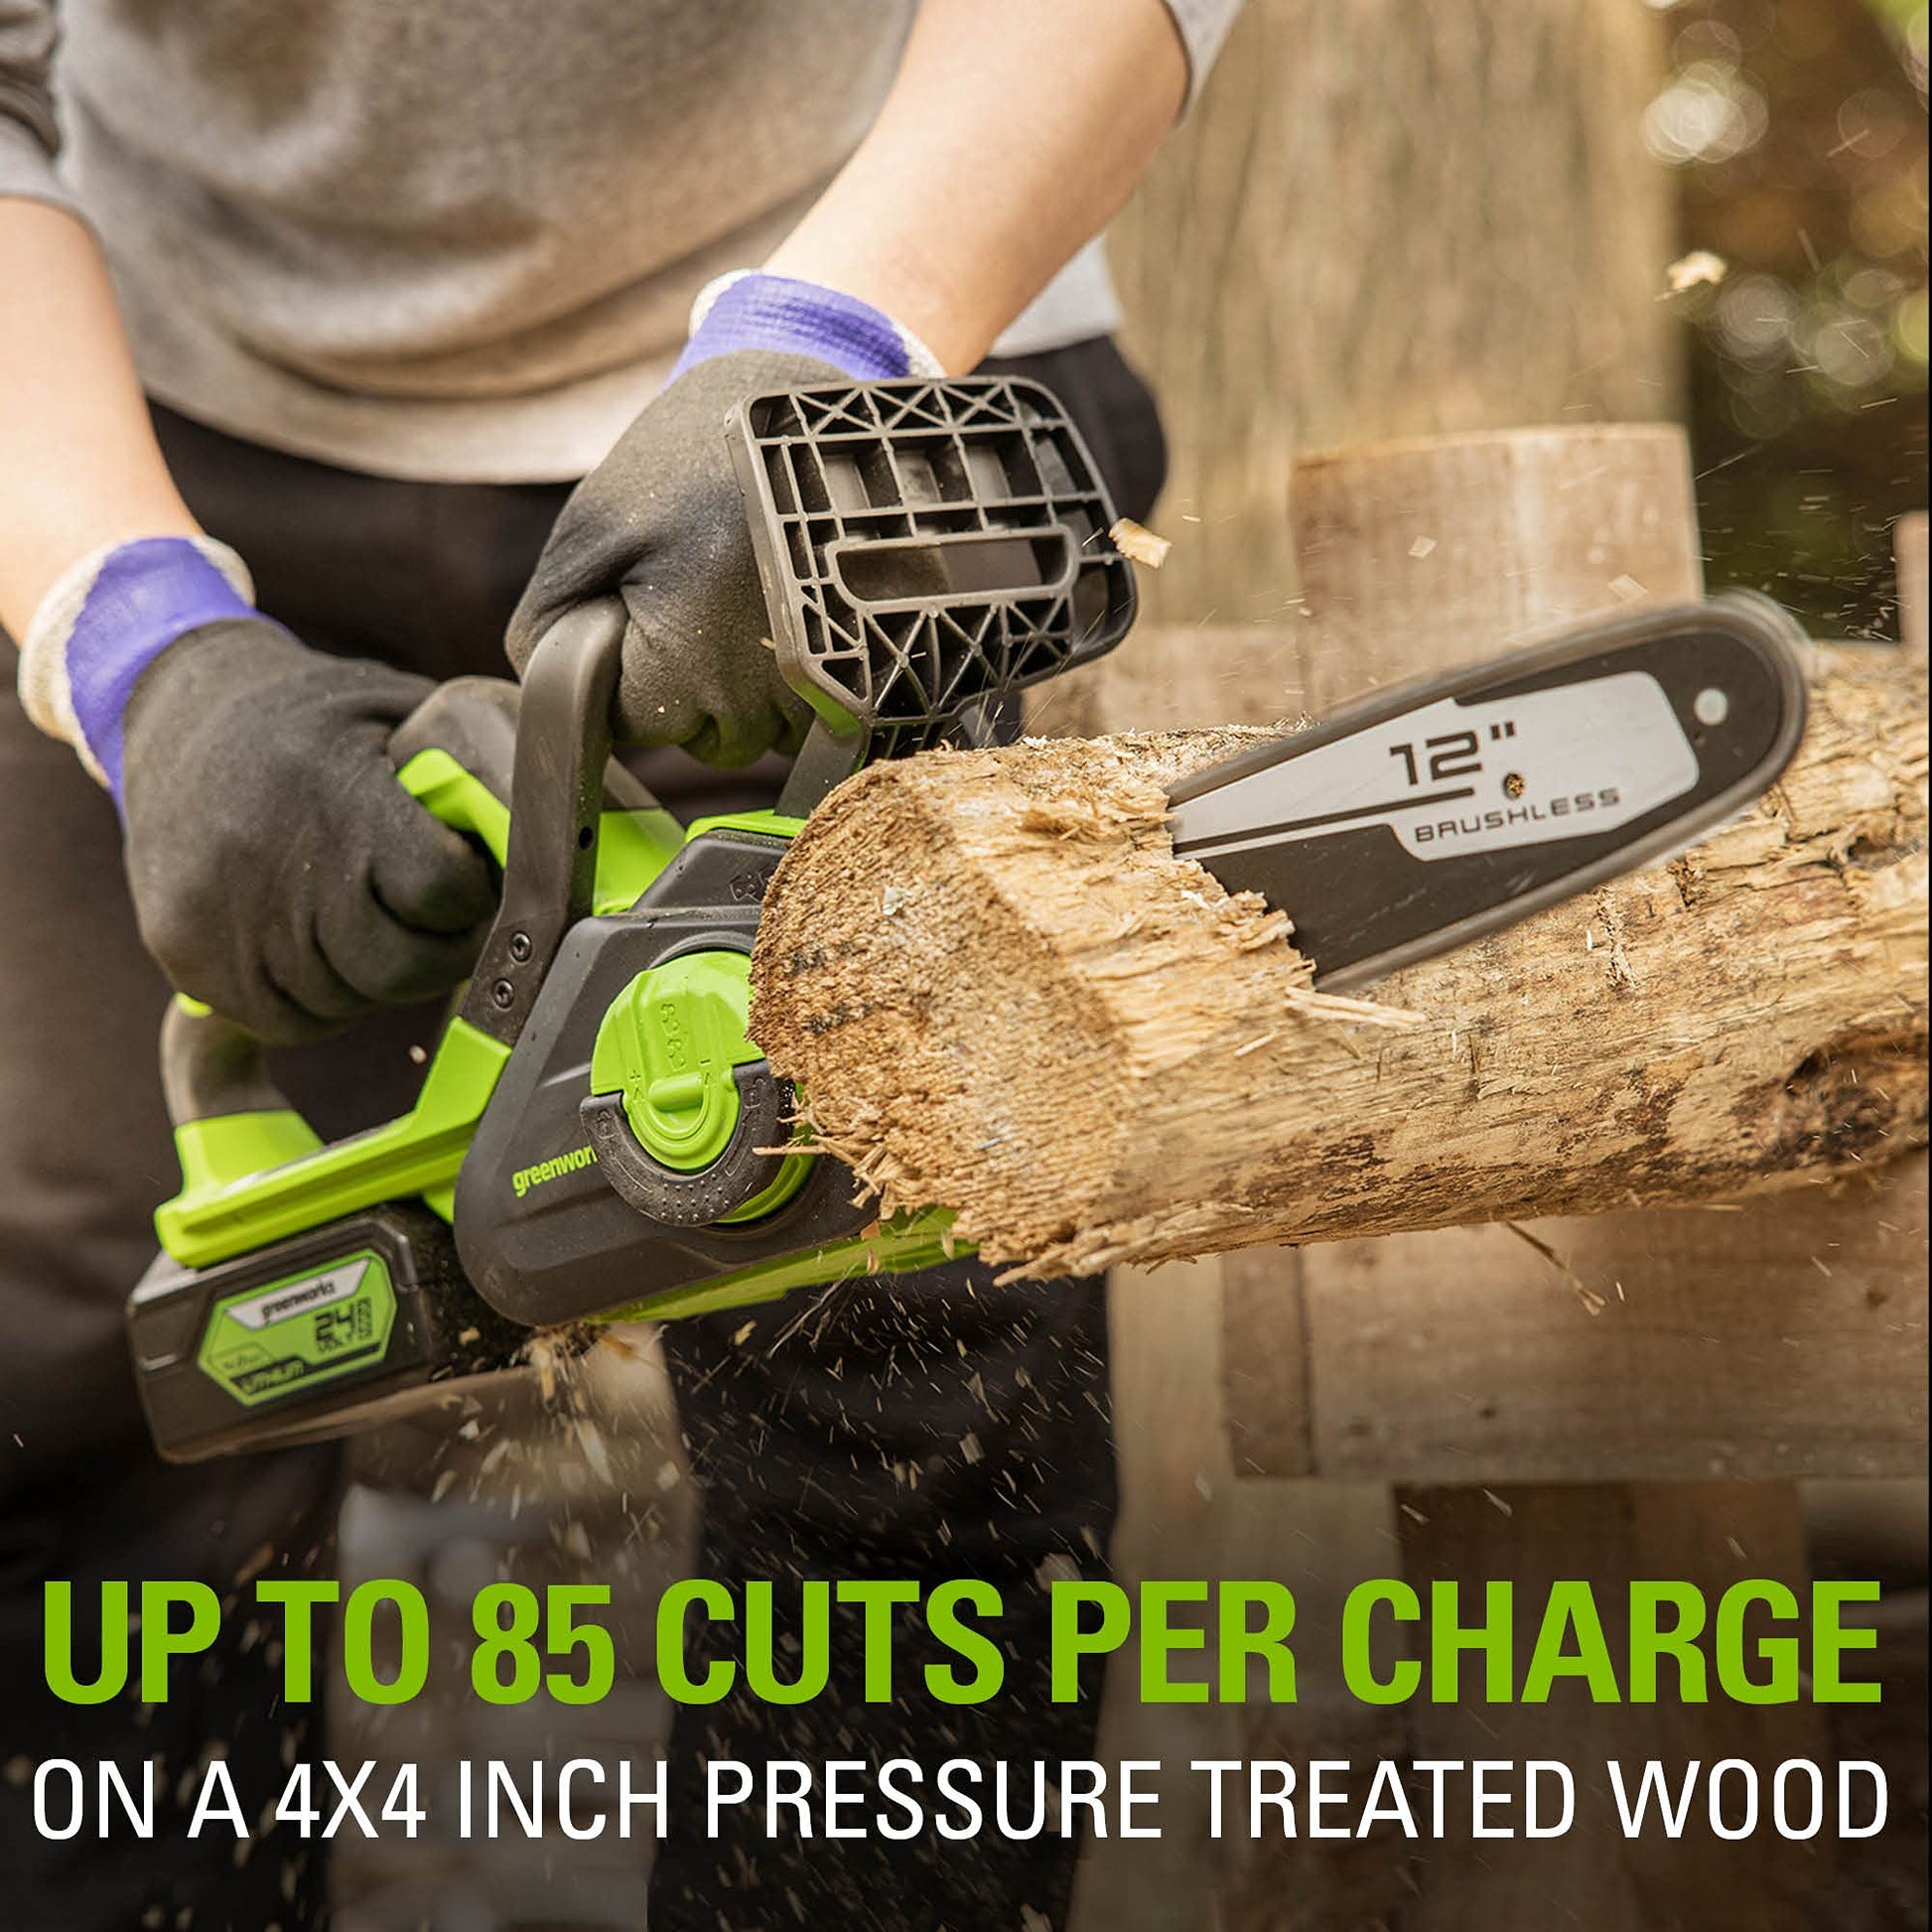 24V 12 Brushless Chainsaw (Tool Only) – Greenworks Tools Canada Inc.